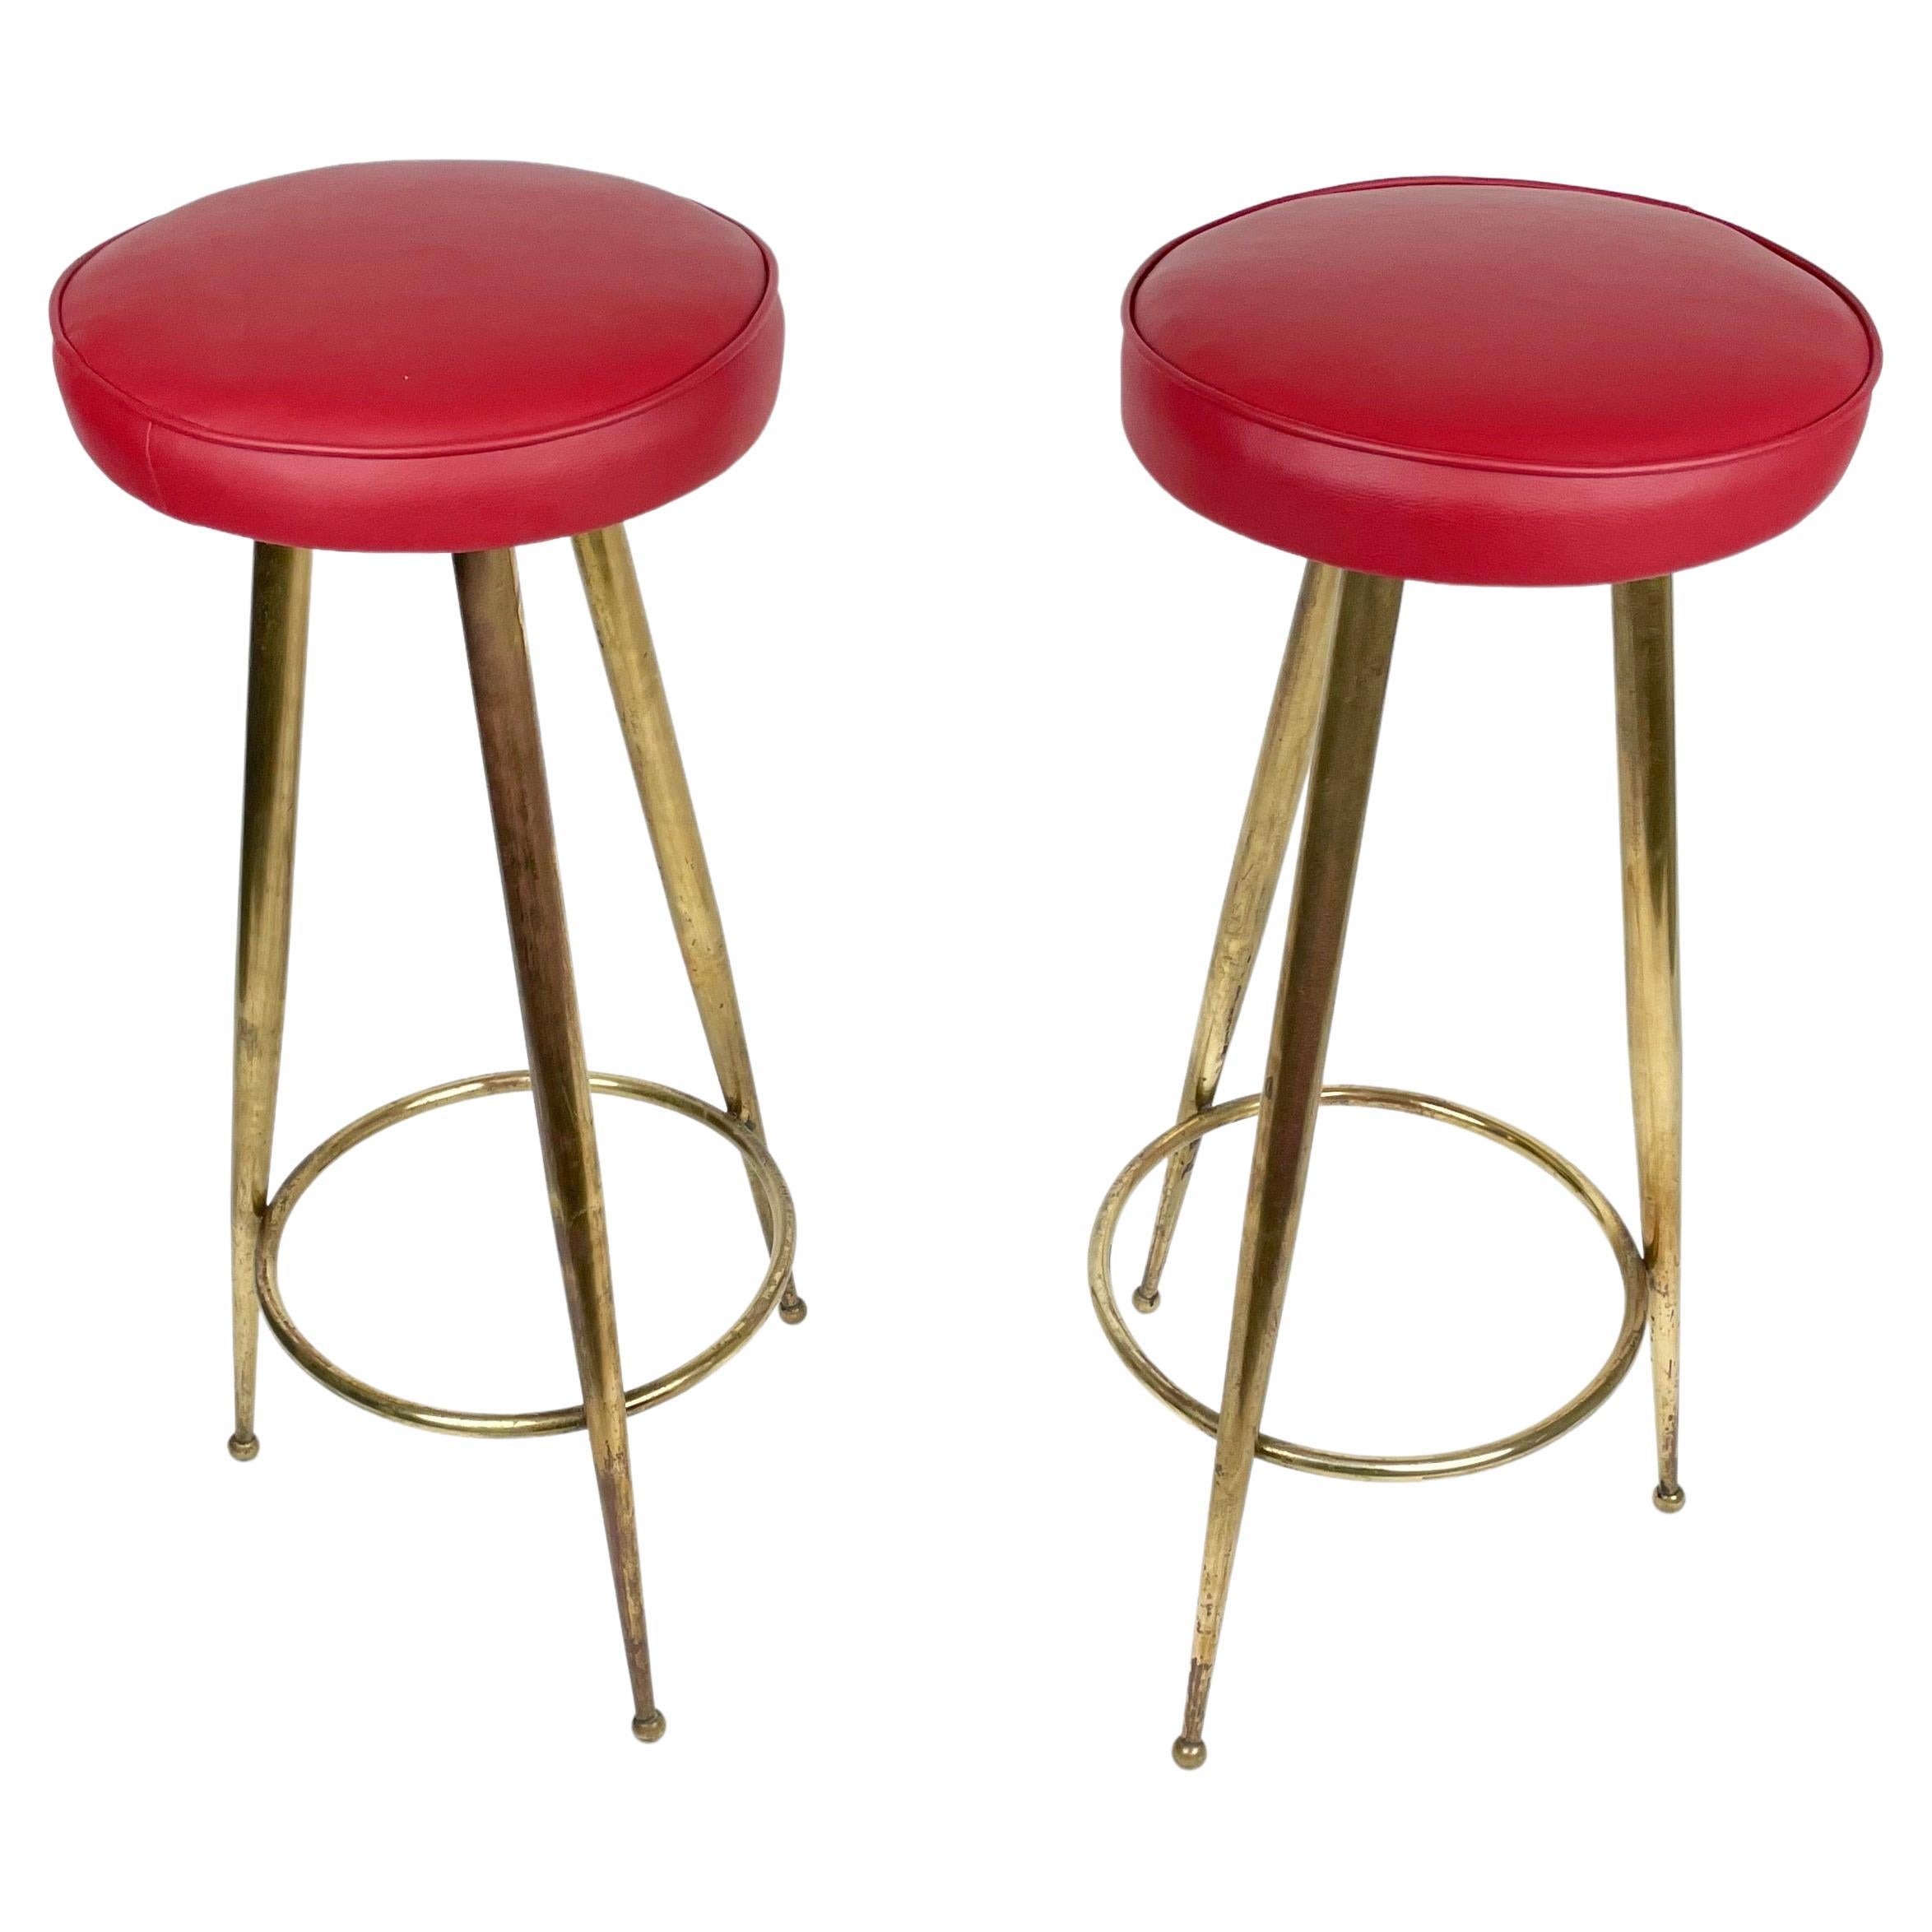 Pair of Tripod Bar Stools Brass and Red Vinyl  Gio Ponti style, Italy 1950s For Sale